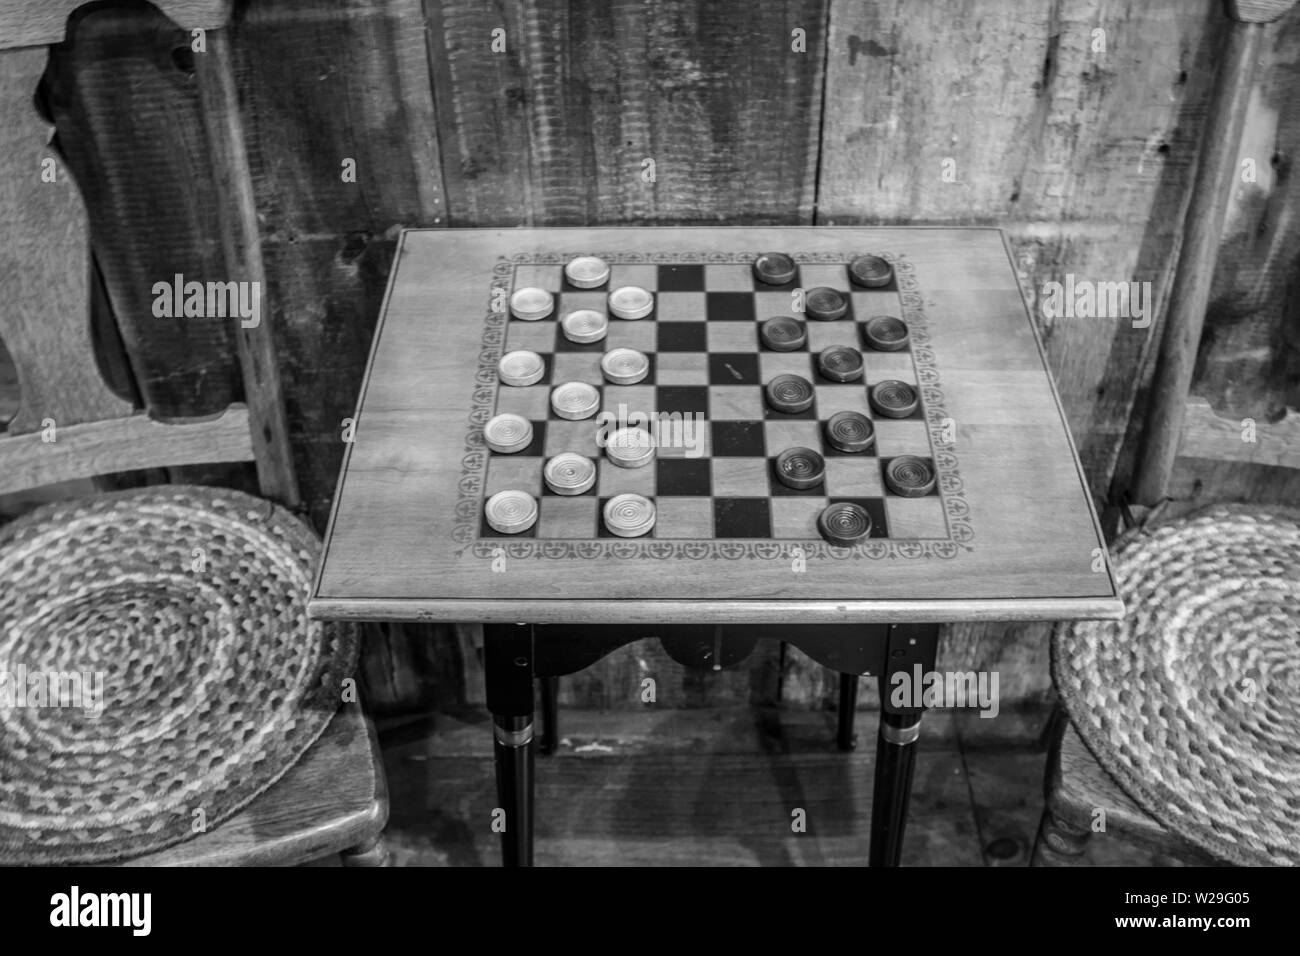 Game Of Checkers. Traditional vintage style wooden checkerboard table with stools in a rural country store. Stock Photo